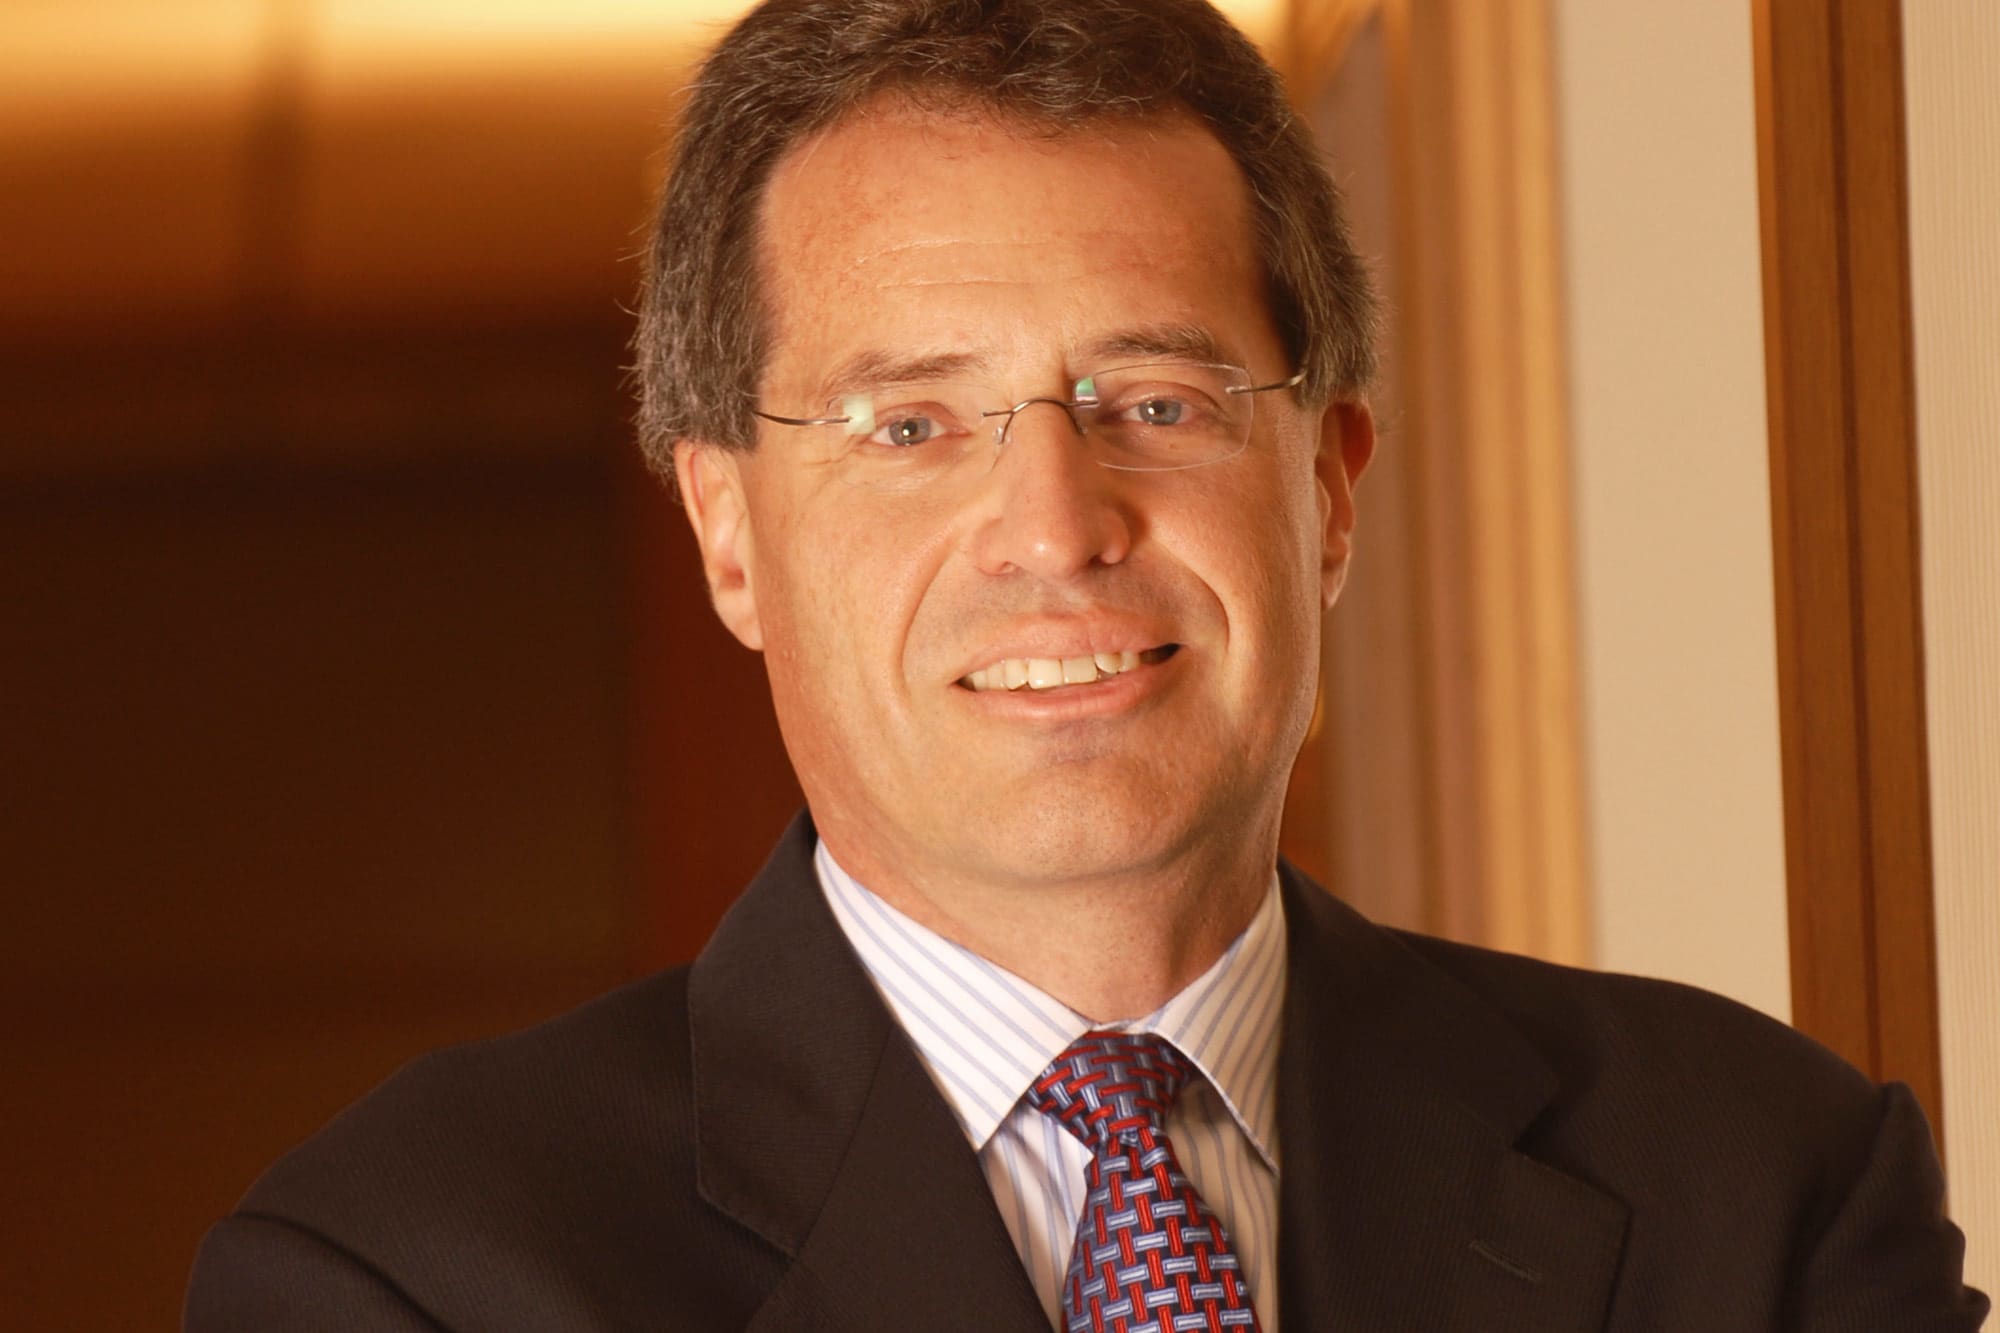 Why value investor Bill Nygren calls this media spinoff the best trade of his career